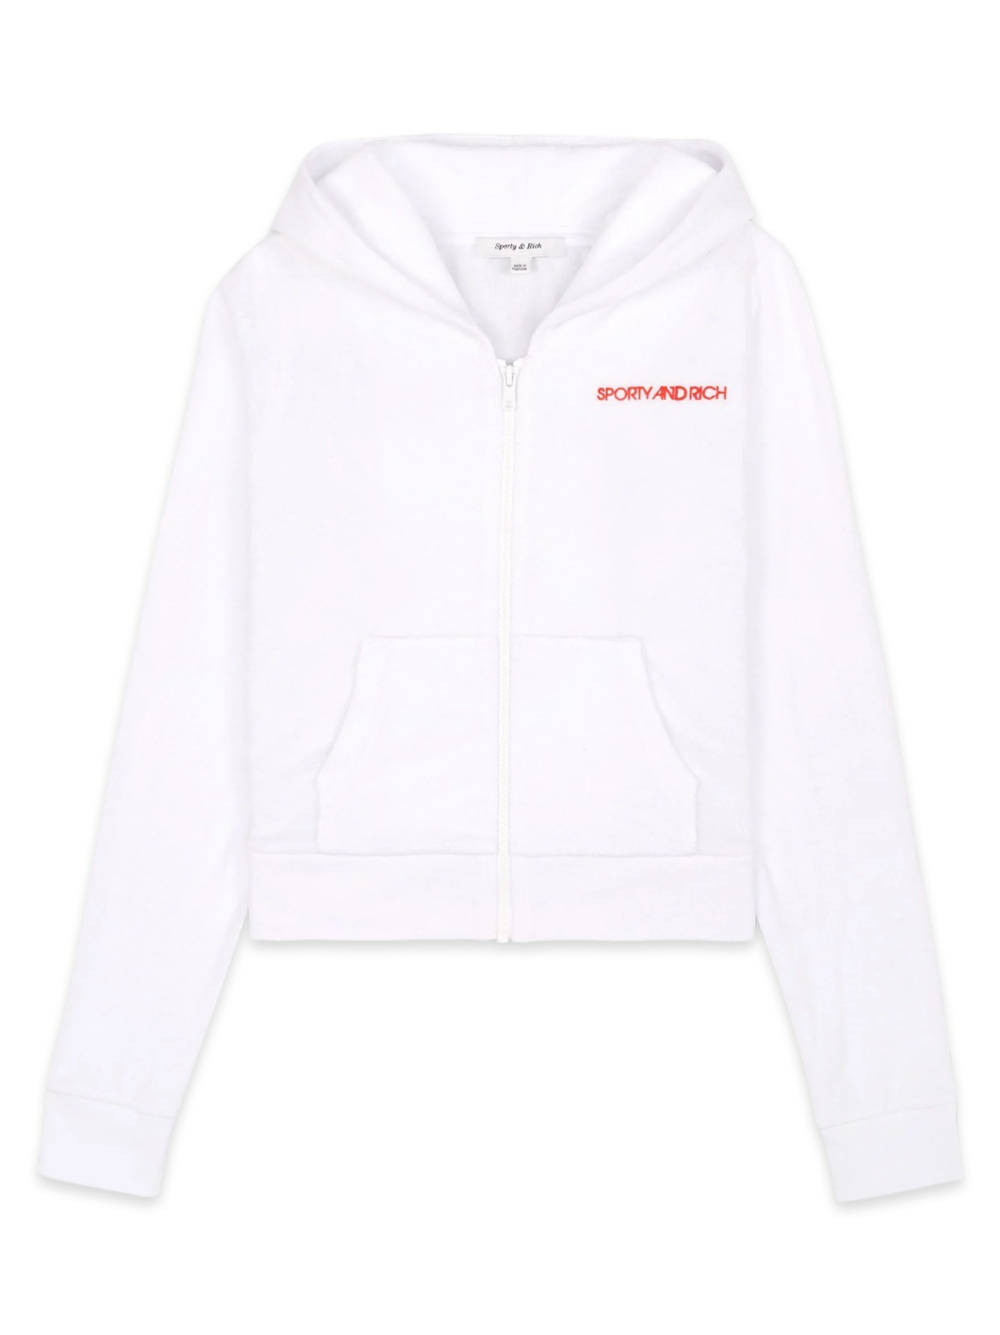 Sporty & Rich Disco Terry Zip Hoodie in White/Cerise